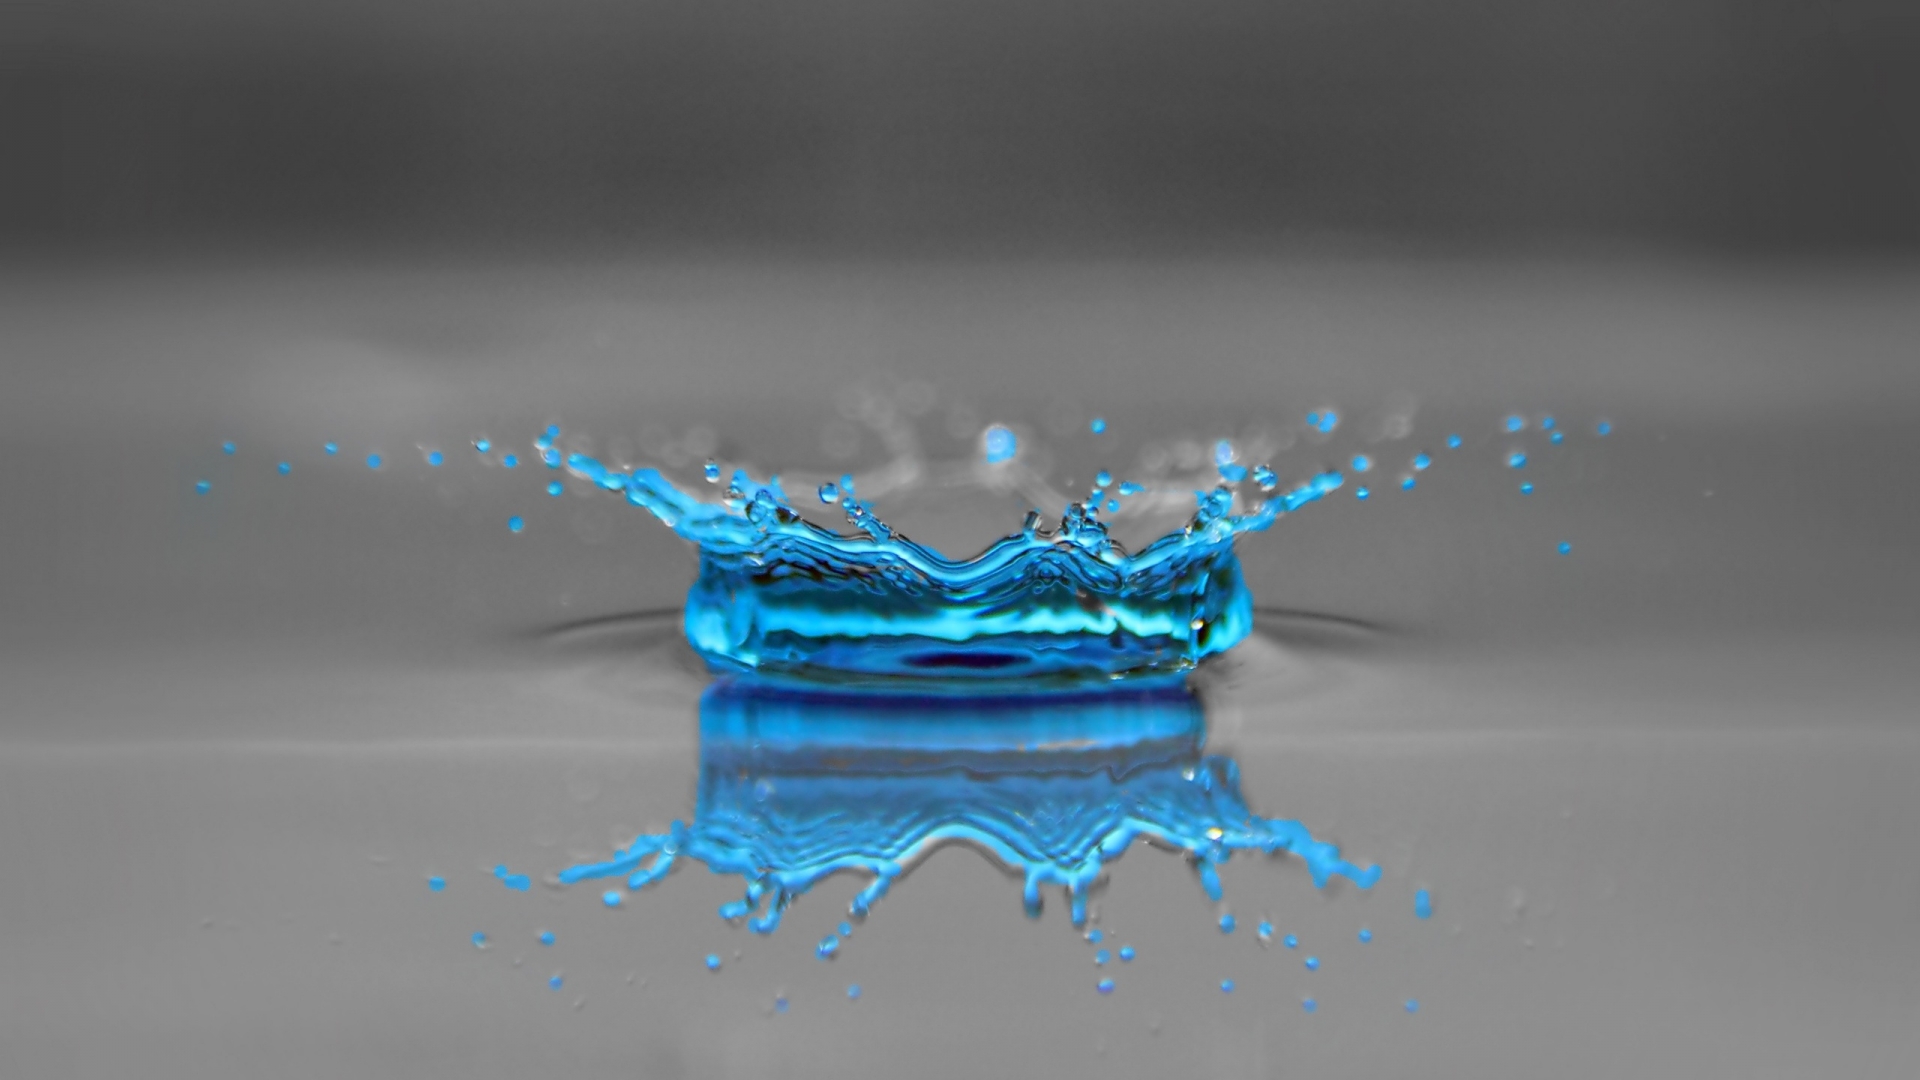 Blue Drop of Water for 1920 x 1080 HDTV 1080p resolution